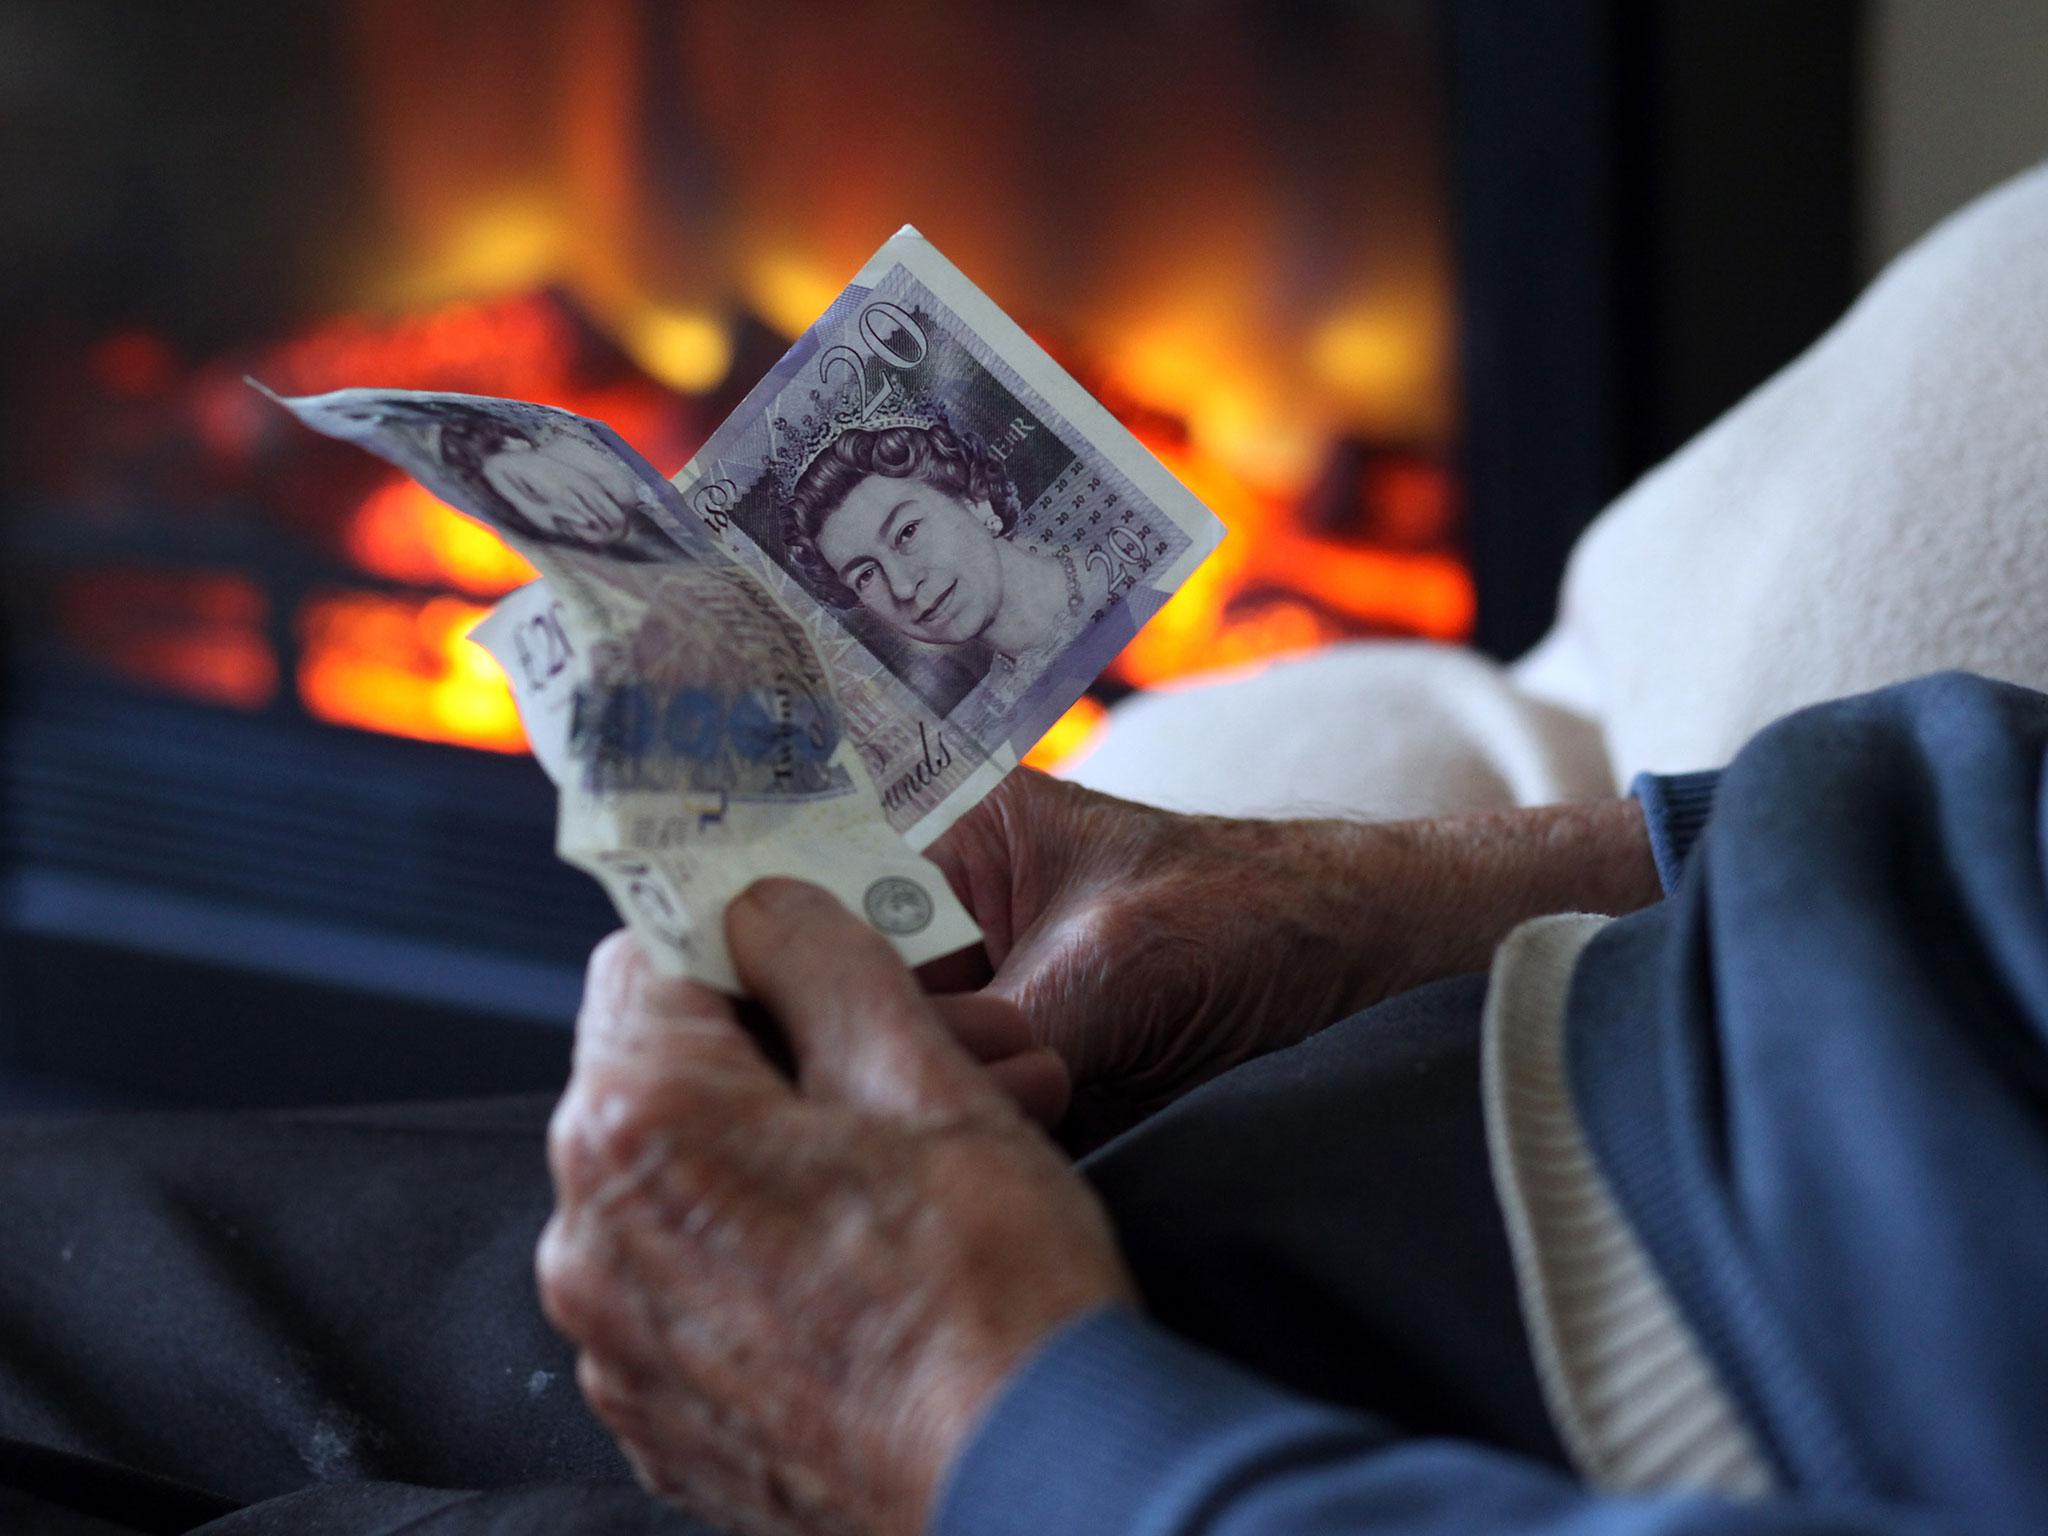 Almost 17,000 people are estimated to have died becuase of fuel poverty